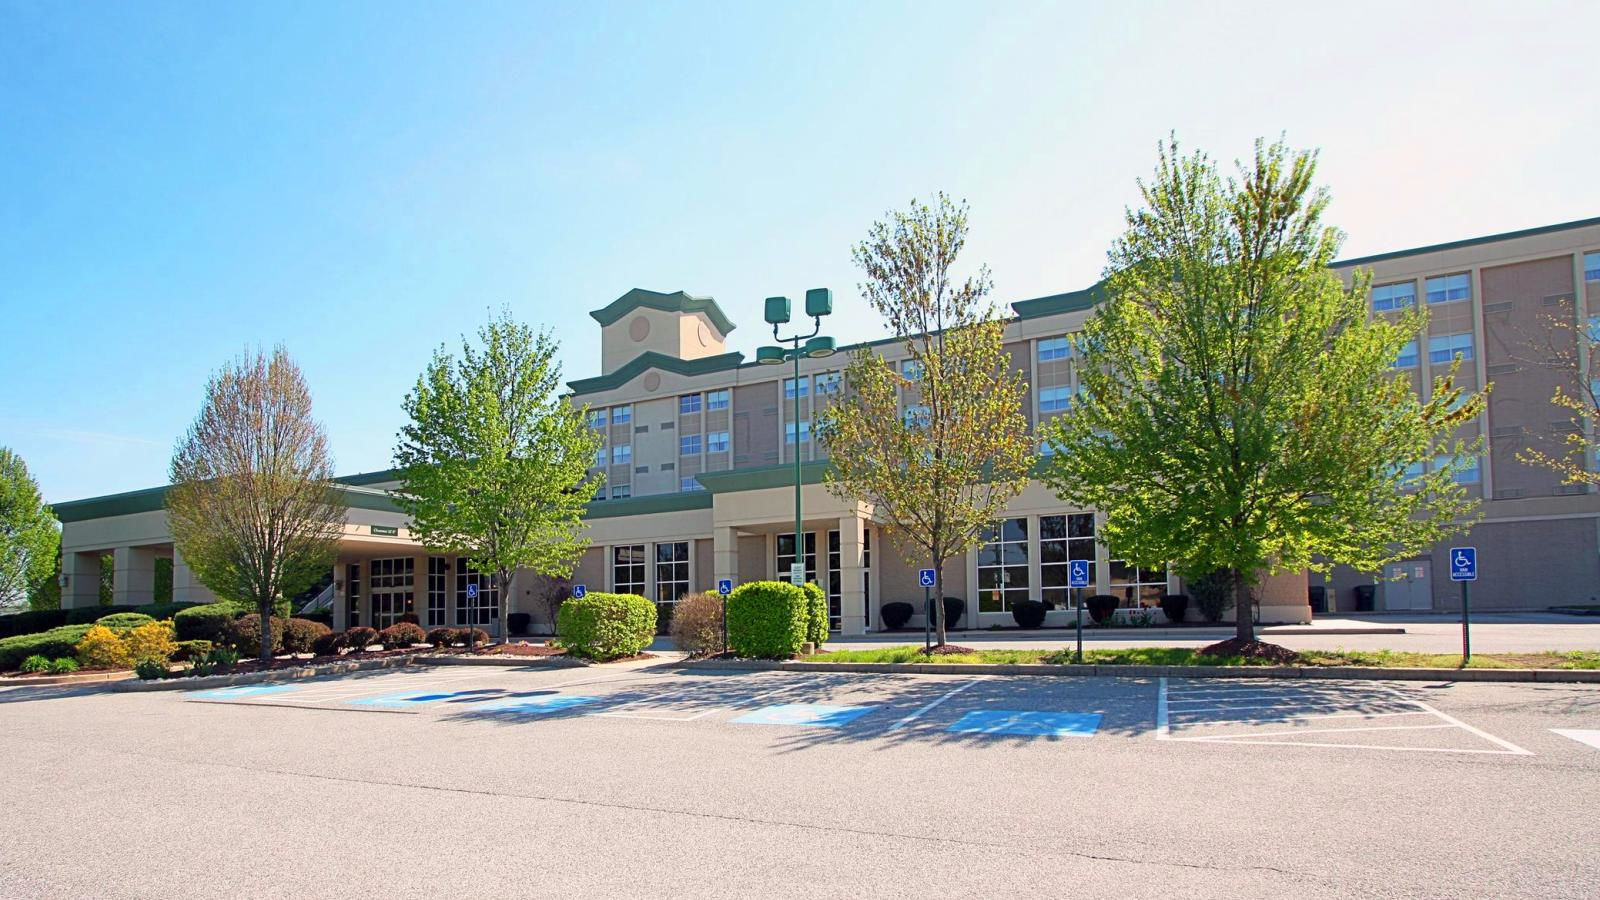 This is Hotel Equities first property in the state of Pennsylvania Sky Points Hospitalityowns the 146-room property and 